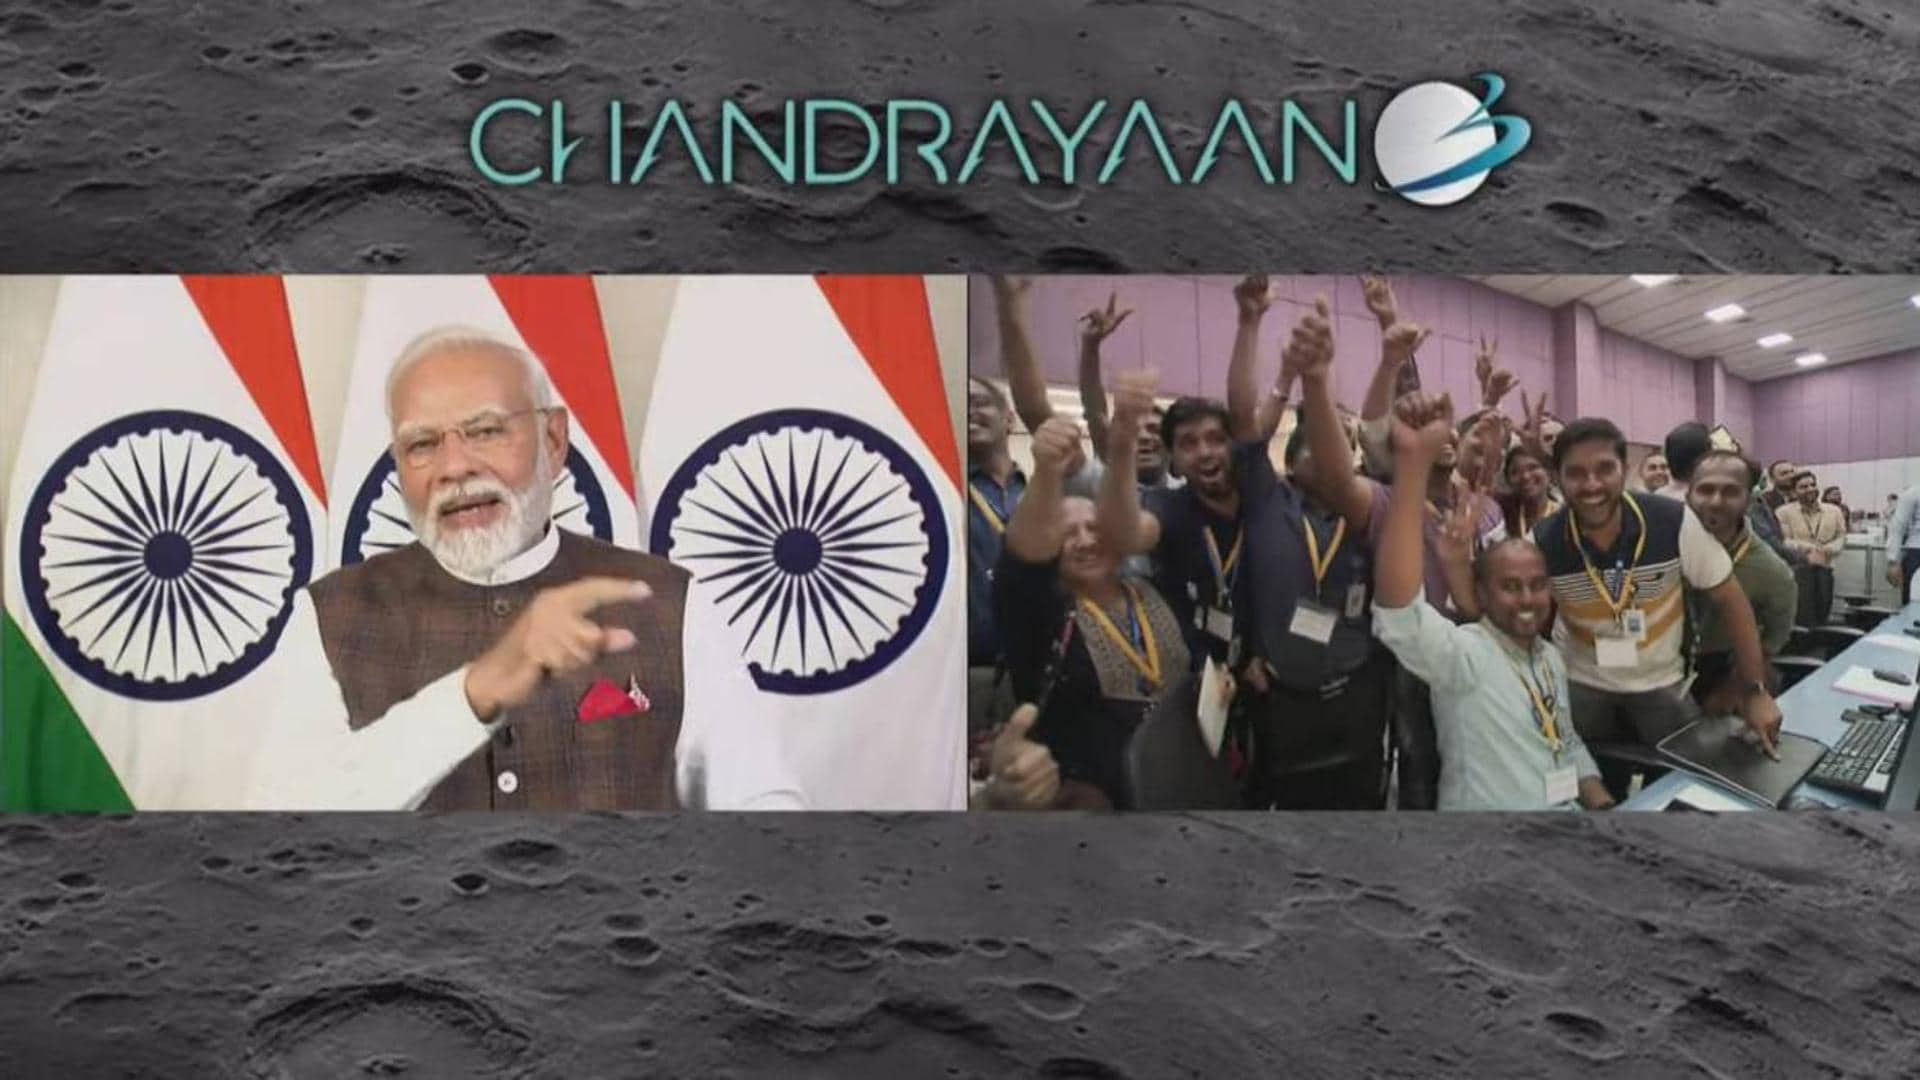 The Indian probe Chandrayaan-3 lands near the south pole of the Moon after the failure of Russia